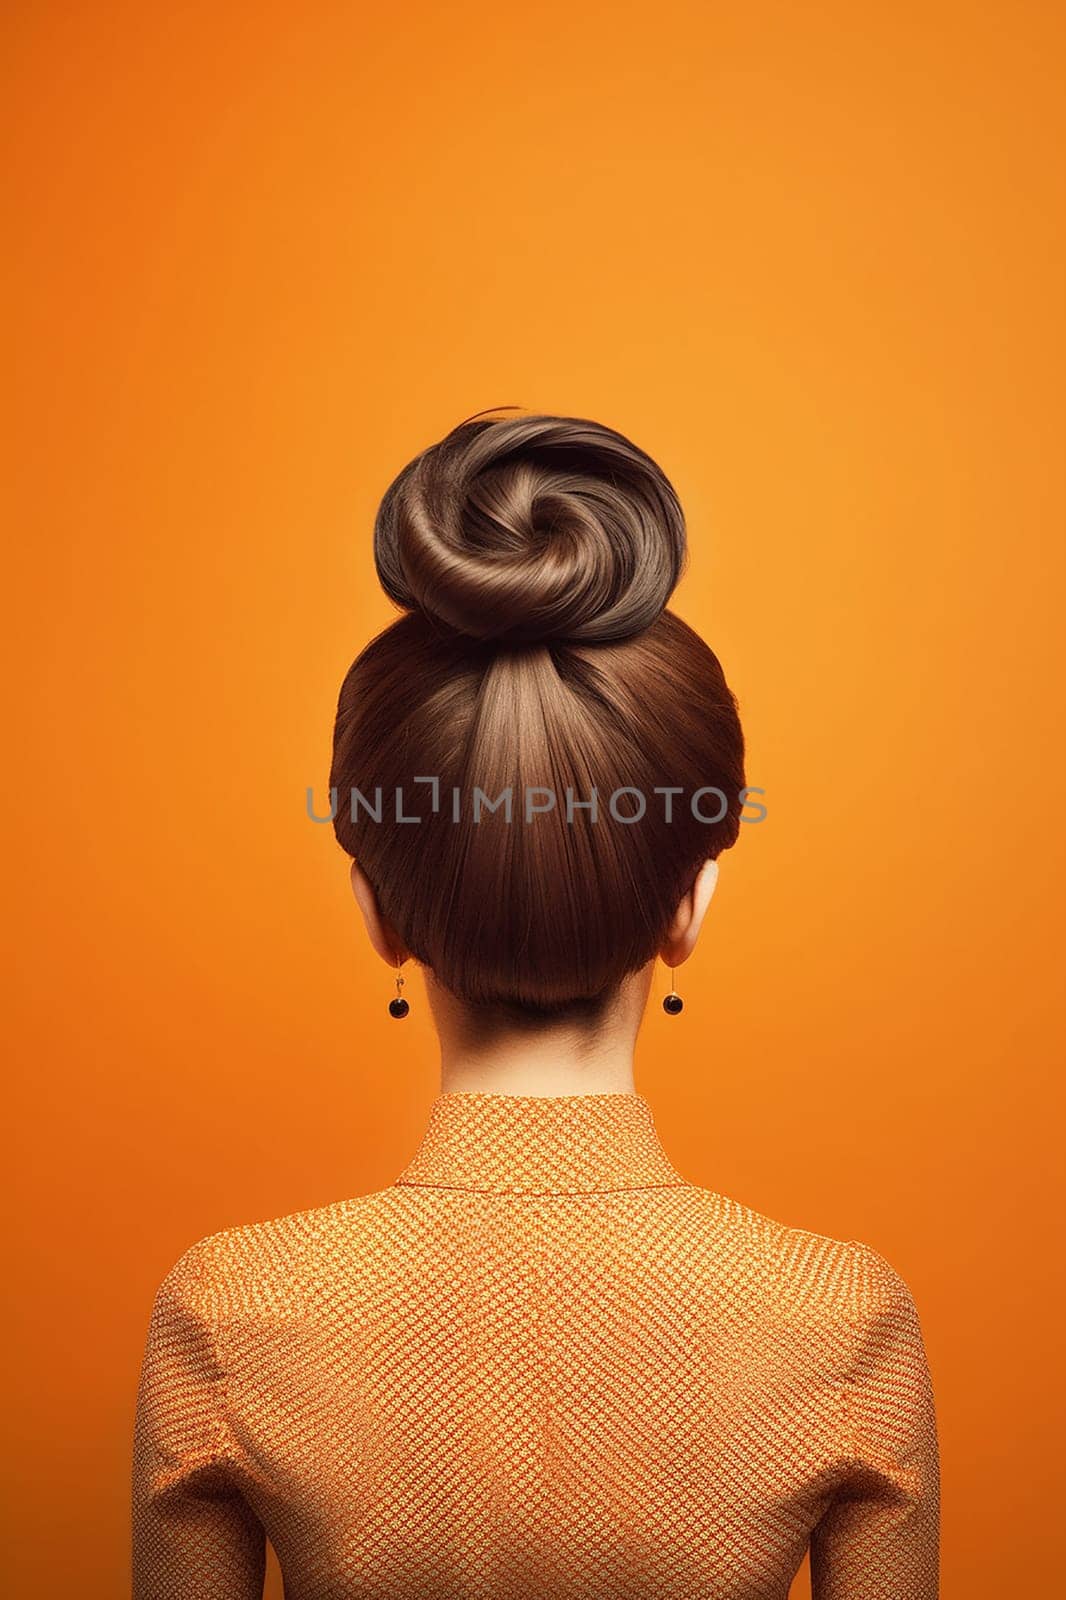 Woman with a stylish bun against an orange background by Hype2art